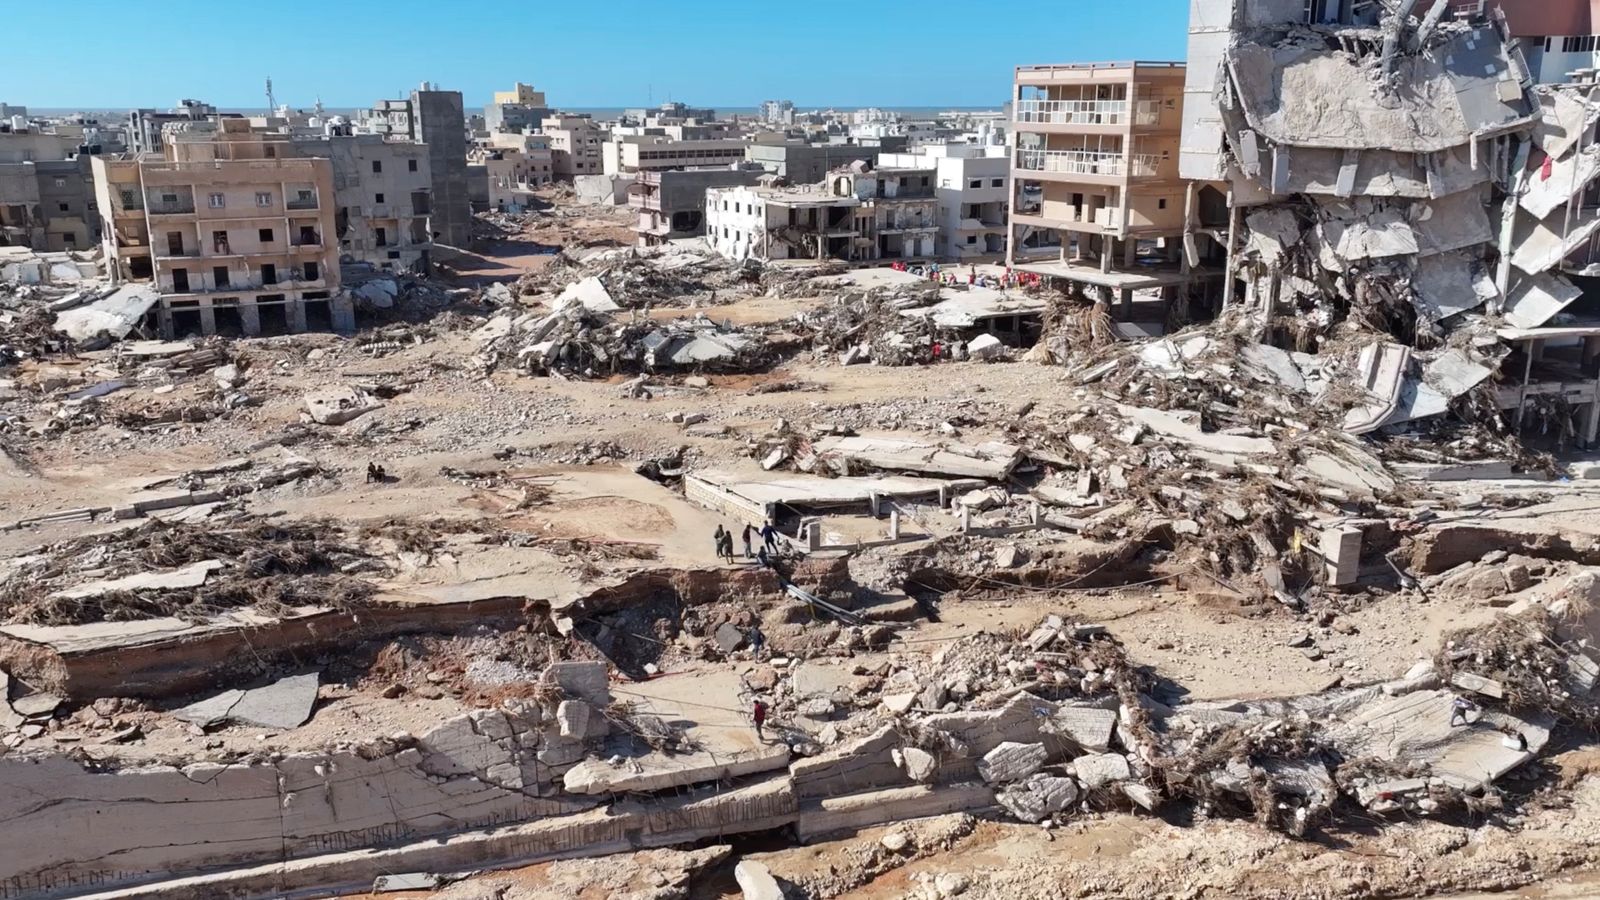 Libya floods: How the injustice of climate change set the stage for disaster in Derna